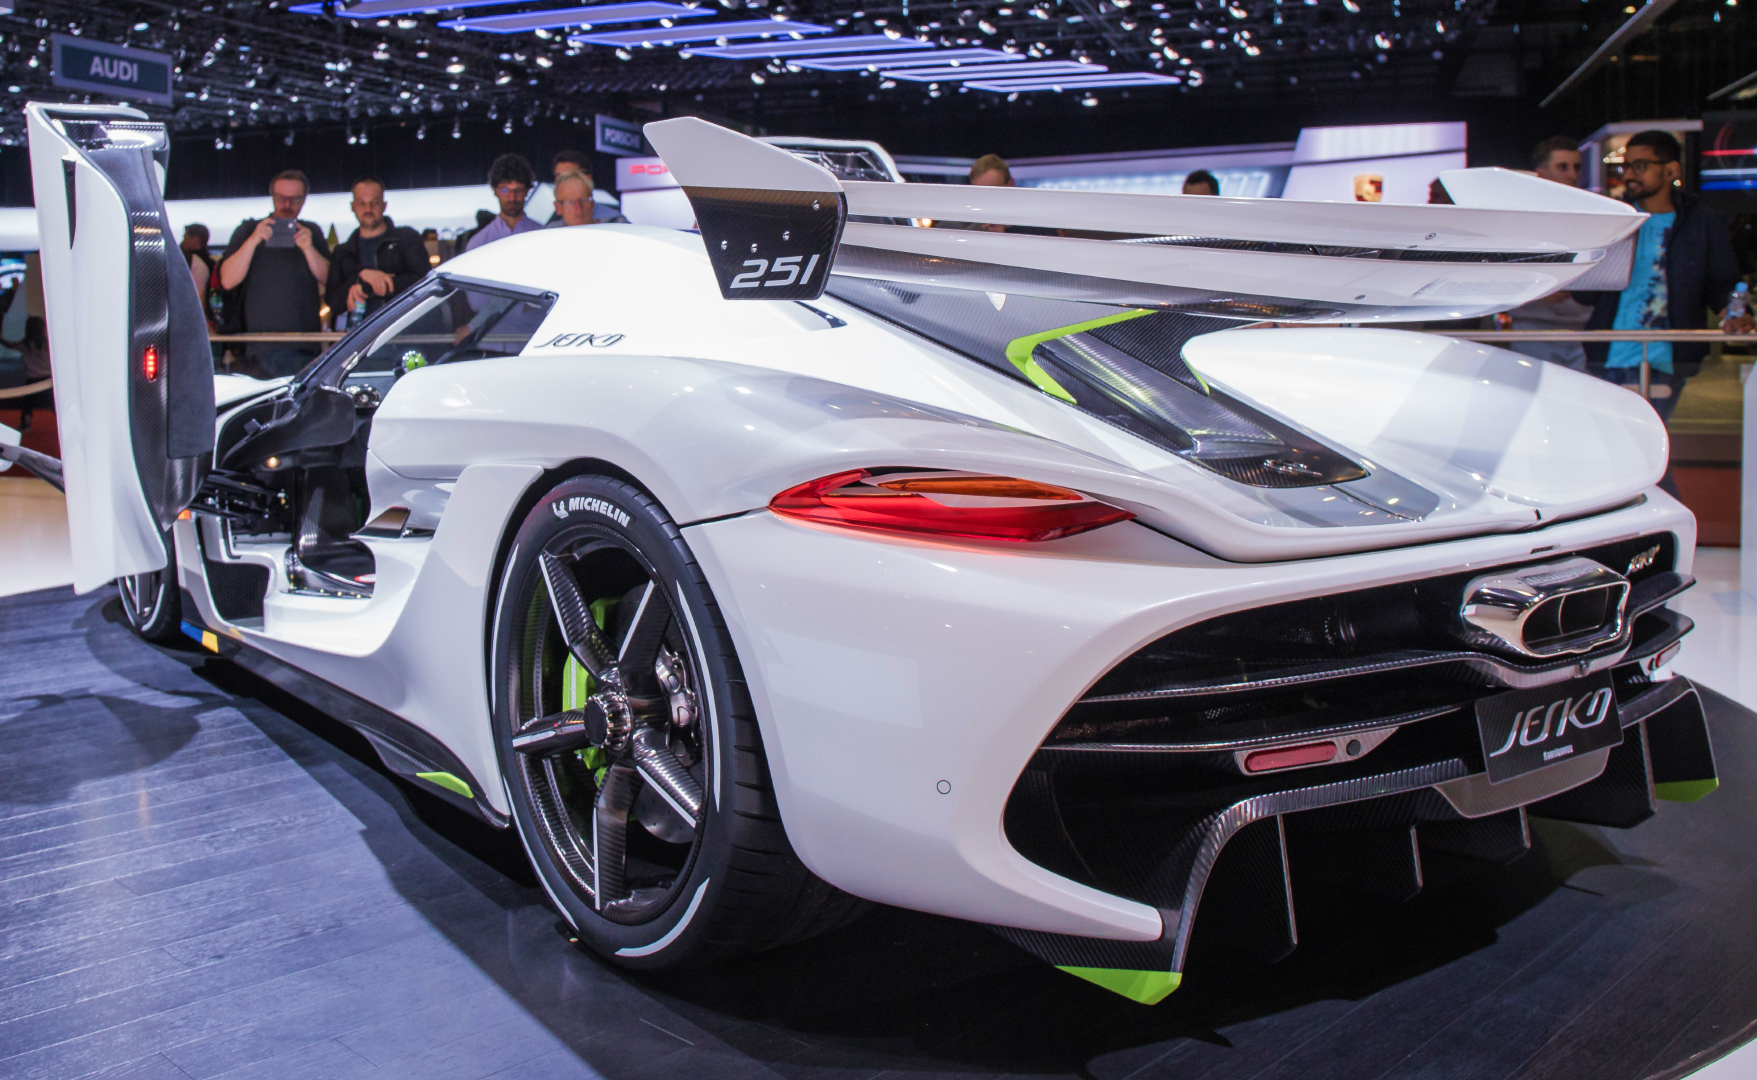 The New $3M Koenigsegg Jesko Supercar is Already Sold Out